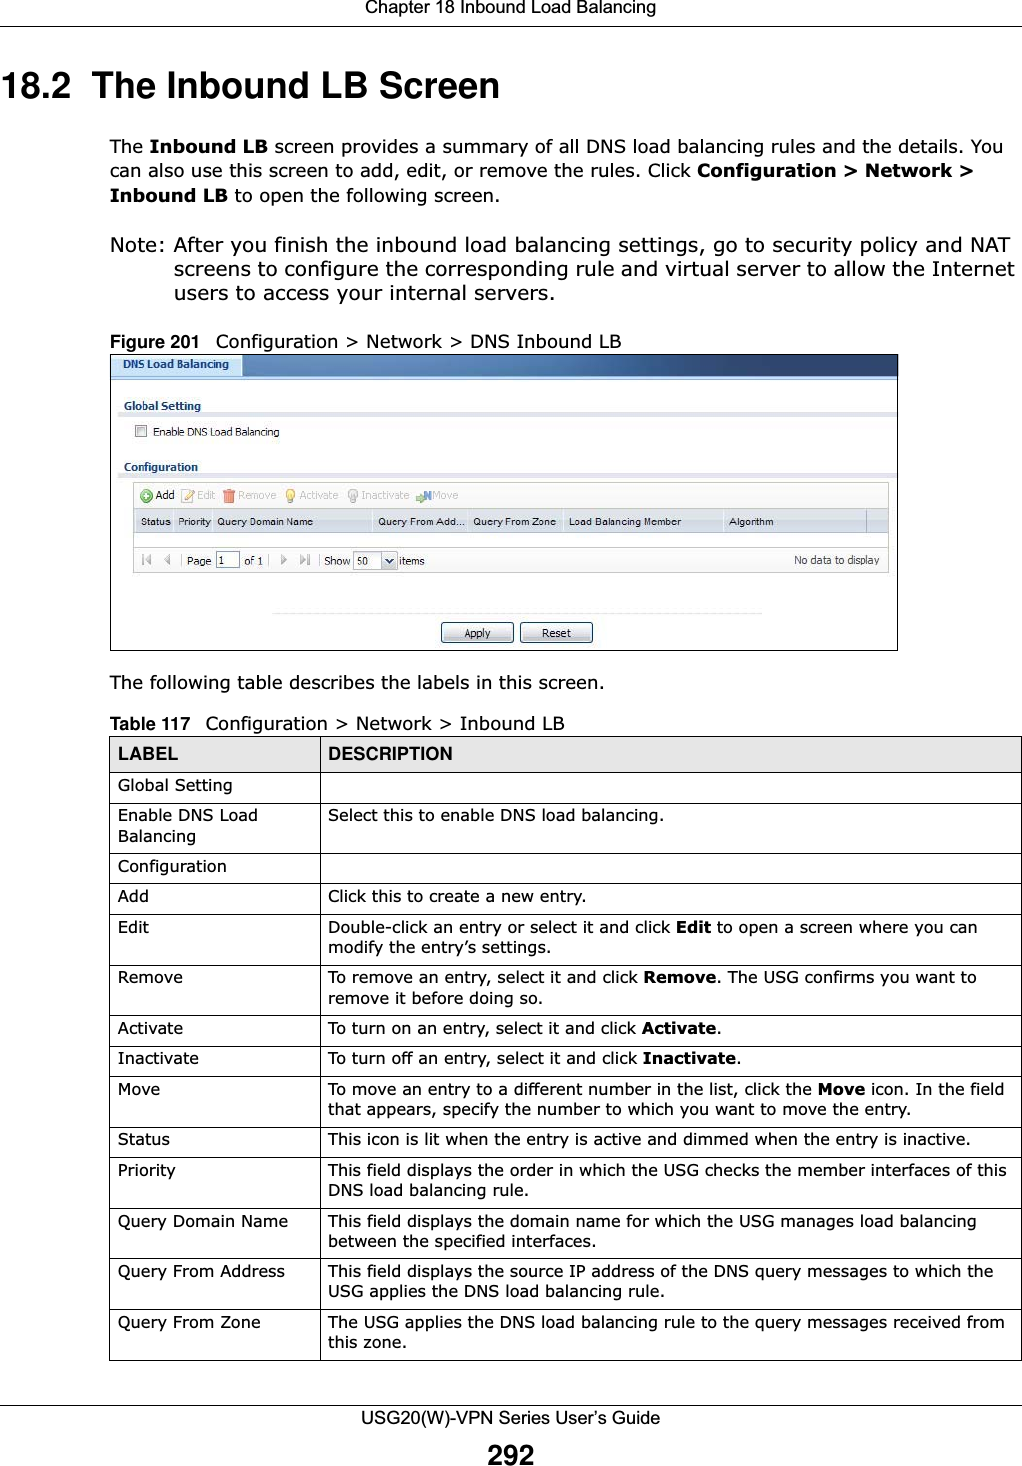 Chapter 18 Inbound Load BalancingUSG20(W)-VPN Series User’s Guide29218.2  The Inbound LB ScreenThe Inbound LB screen provides a summary of all DNS load balancing rules and the details. You can also use this screen to add, edit, or remove the rules. Click Configuration &gt; Network &gt; Inbound LB to open the following screen.Note: After you finish the inbound load balancing settings, go to security policy and NAT screens to configure the corresponding rule and virtual server to allow the Internet users to access your internal servers.Figure 201   Configuration &gt; Network &gt; DNS Inbound LB  The following table describes the labels in this screen. Table 117   Configuration &gt; Network &gt; Inbound LBLABEL DESCRIPTIONGlobal SettingEnable DNS Load BalancingSelect this to enable DNS load balancing.ConfigurationAdd Click this to create a new entry.Edit Double-click an entry or select it and click Edit to open a screen where you can modify the entry’s settings. Remove To remove an entry, select it and click Remove. The USG confirms you want to remove it before doing so.Activate To turn on an entry, select it and click Activate.Inactivate To turn off an entry, select it and click Inactivate.Move To move an entry to a different number in the list, click the Move icon. In the field that appears, specify the number to which you want to move the entry.Status This icon is lit when the entry is active and dimmed when the entry is inactive.Priority This field displays the order in which the USG checks the member interfaces of this DNS load balancing rule.Query Domain Name This field displays the domain name for which the USG manages load balancing between the specified interfaces.Query From Address This field displays the source IP address of the DNS query messages to which the USG applies the DNS load balancing rule.Query From Zone The USG applies the DNS load balancing rule to the query messages received from this zone.